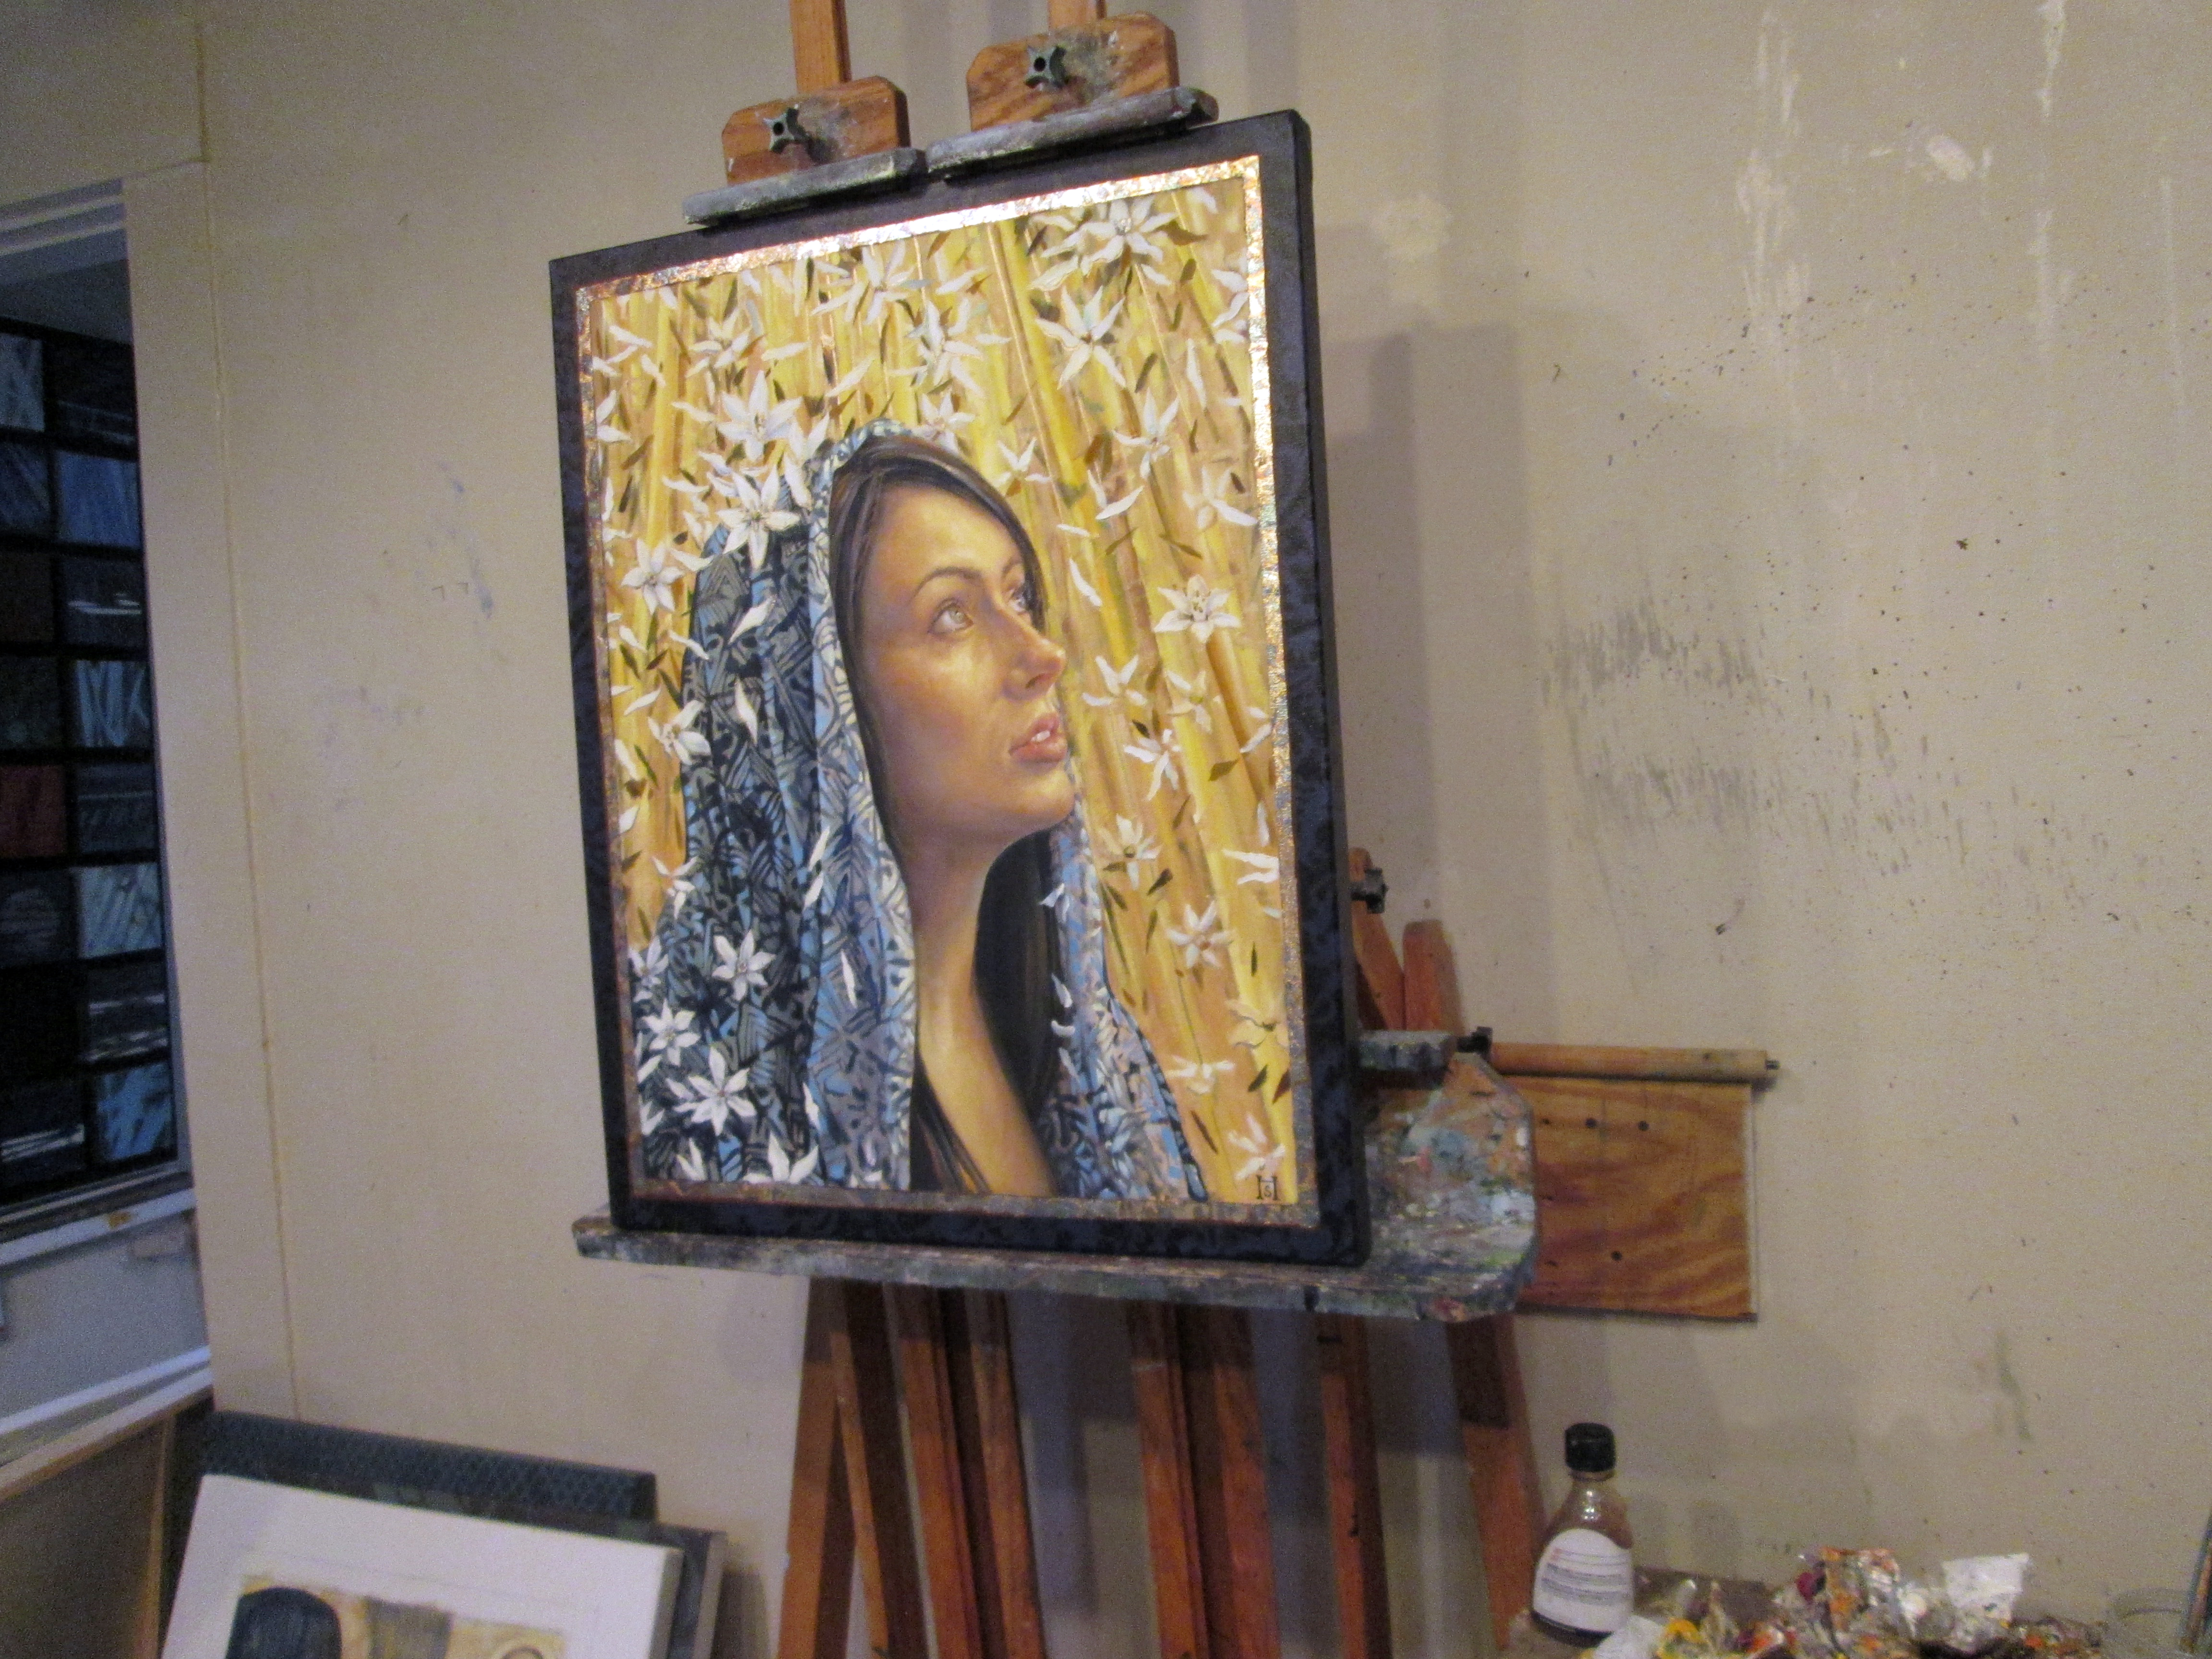 A finished painting titled "White Blossoms Covered Mary ? Star of Bethlehem" sits in the artist's studio